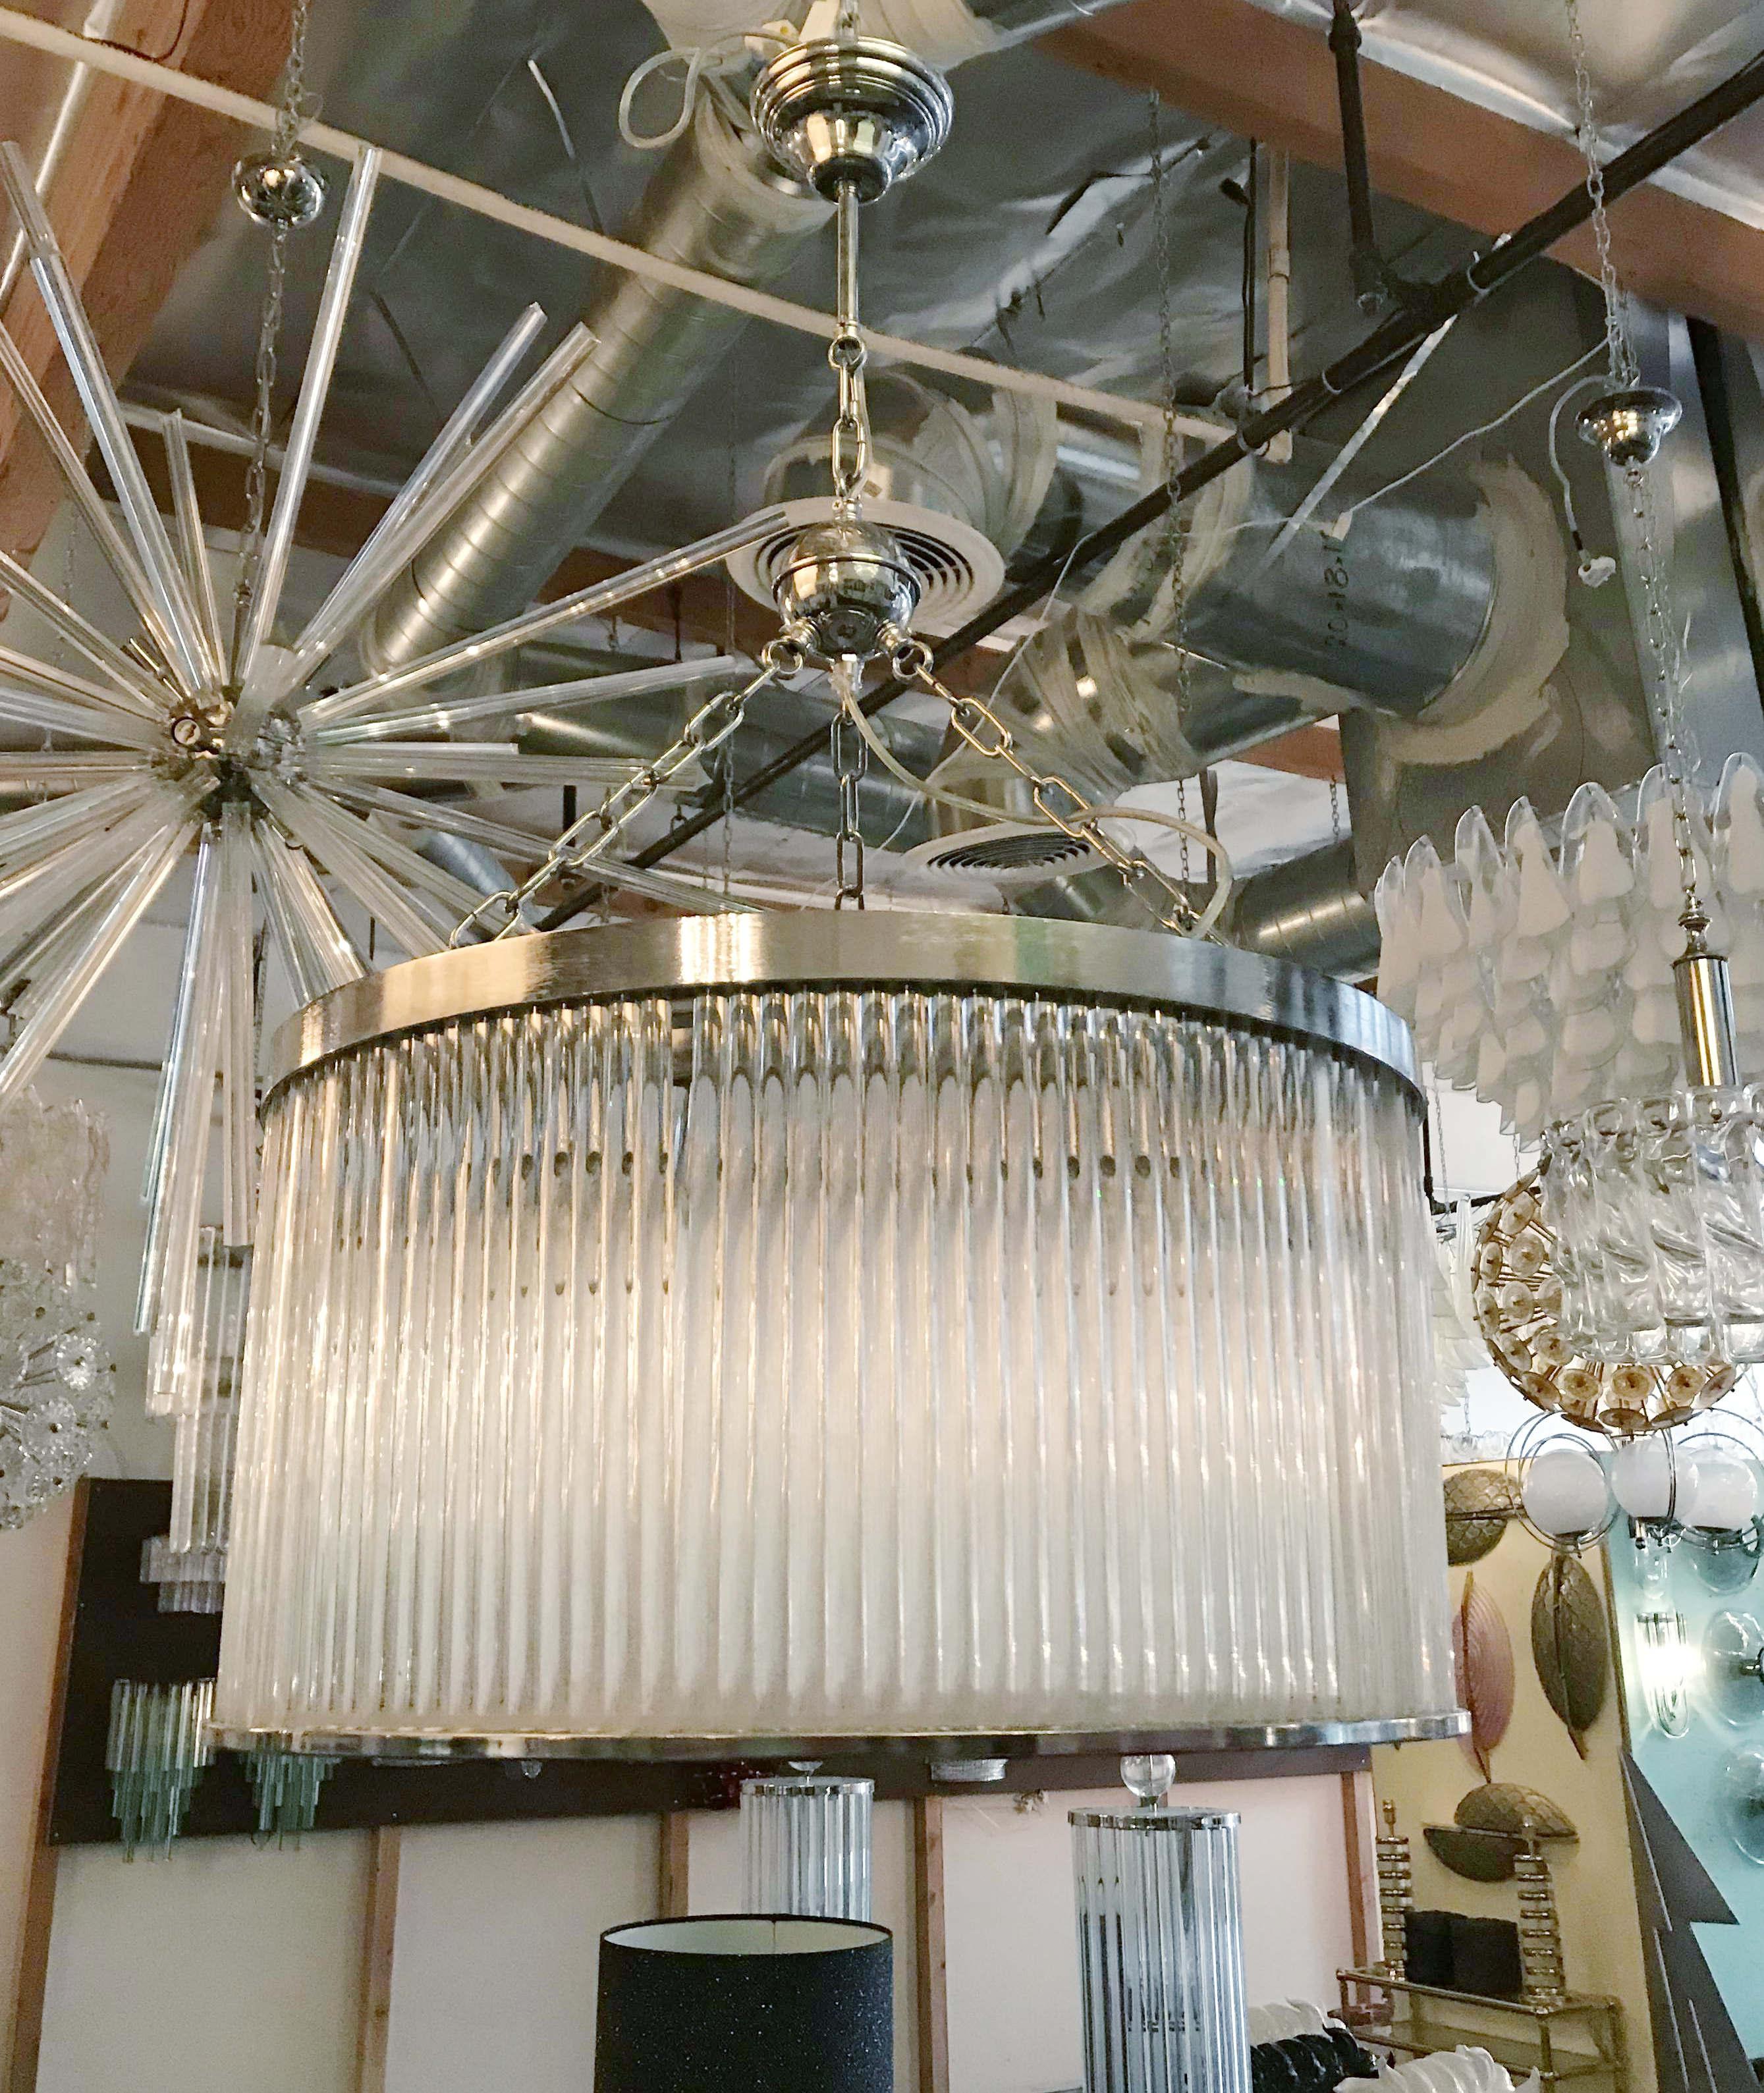 Vintage chandelier with two layers of clear glass rods arranged to form a drum shape with acrylic bottom diffuser, mounted on chrome frame / Made in Italy circa 1980s
6 lights / E26 or E27 type / max 60W each
Measures: Diameter 24 inches / height 14